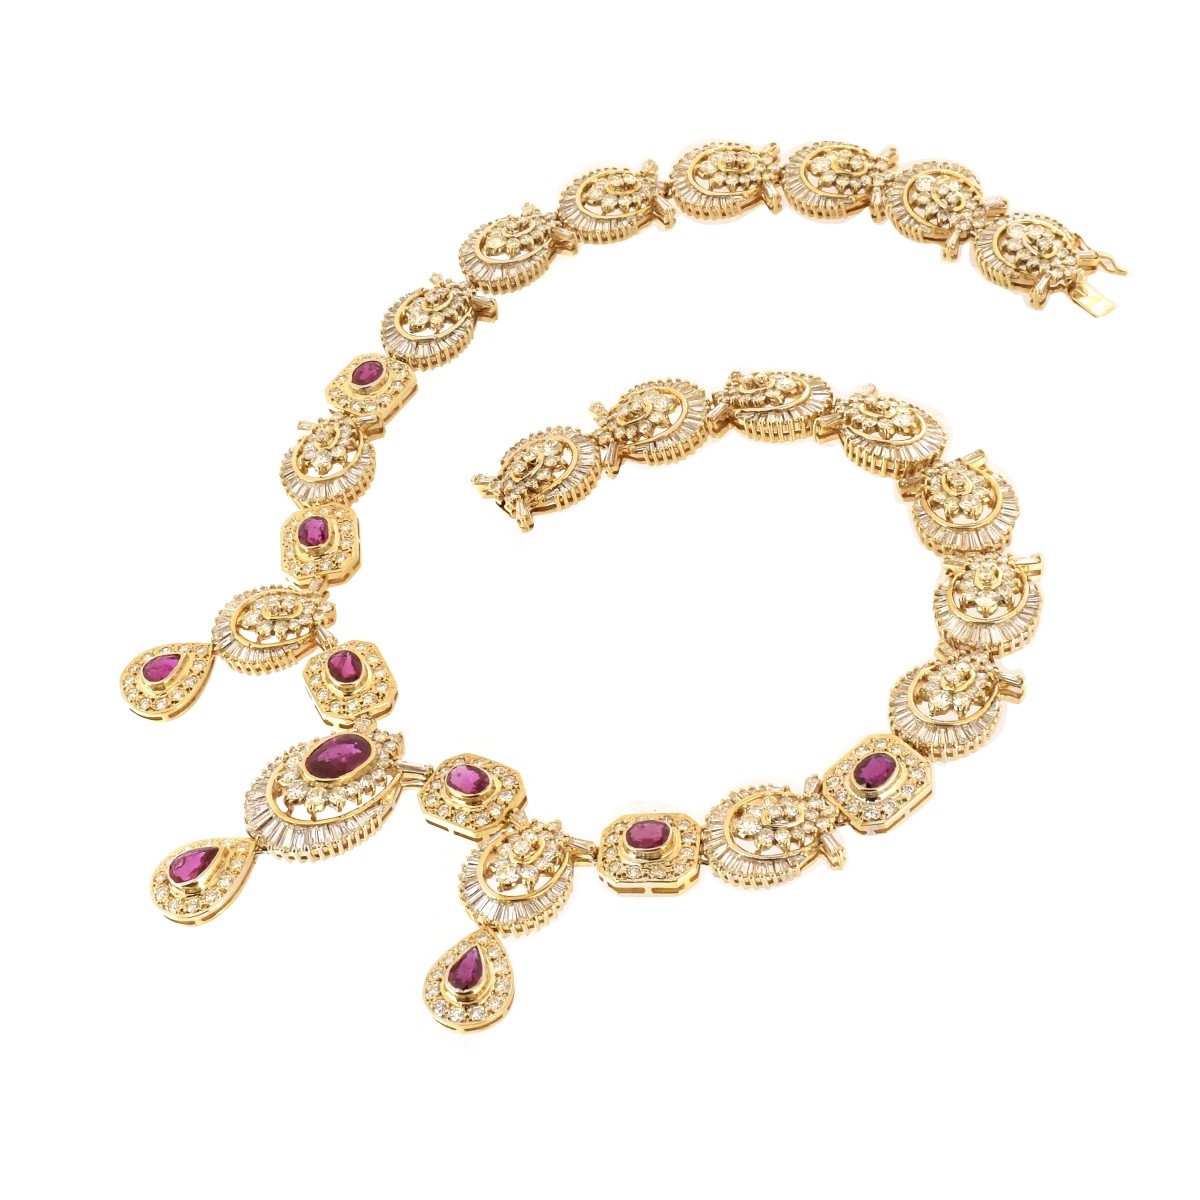 Diamond, Ruby and 18K Necklace